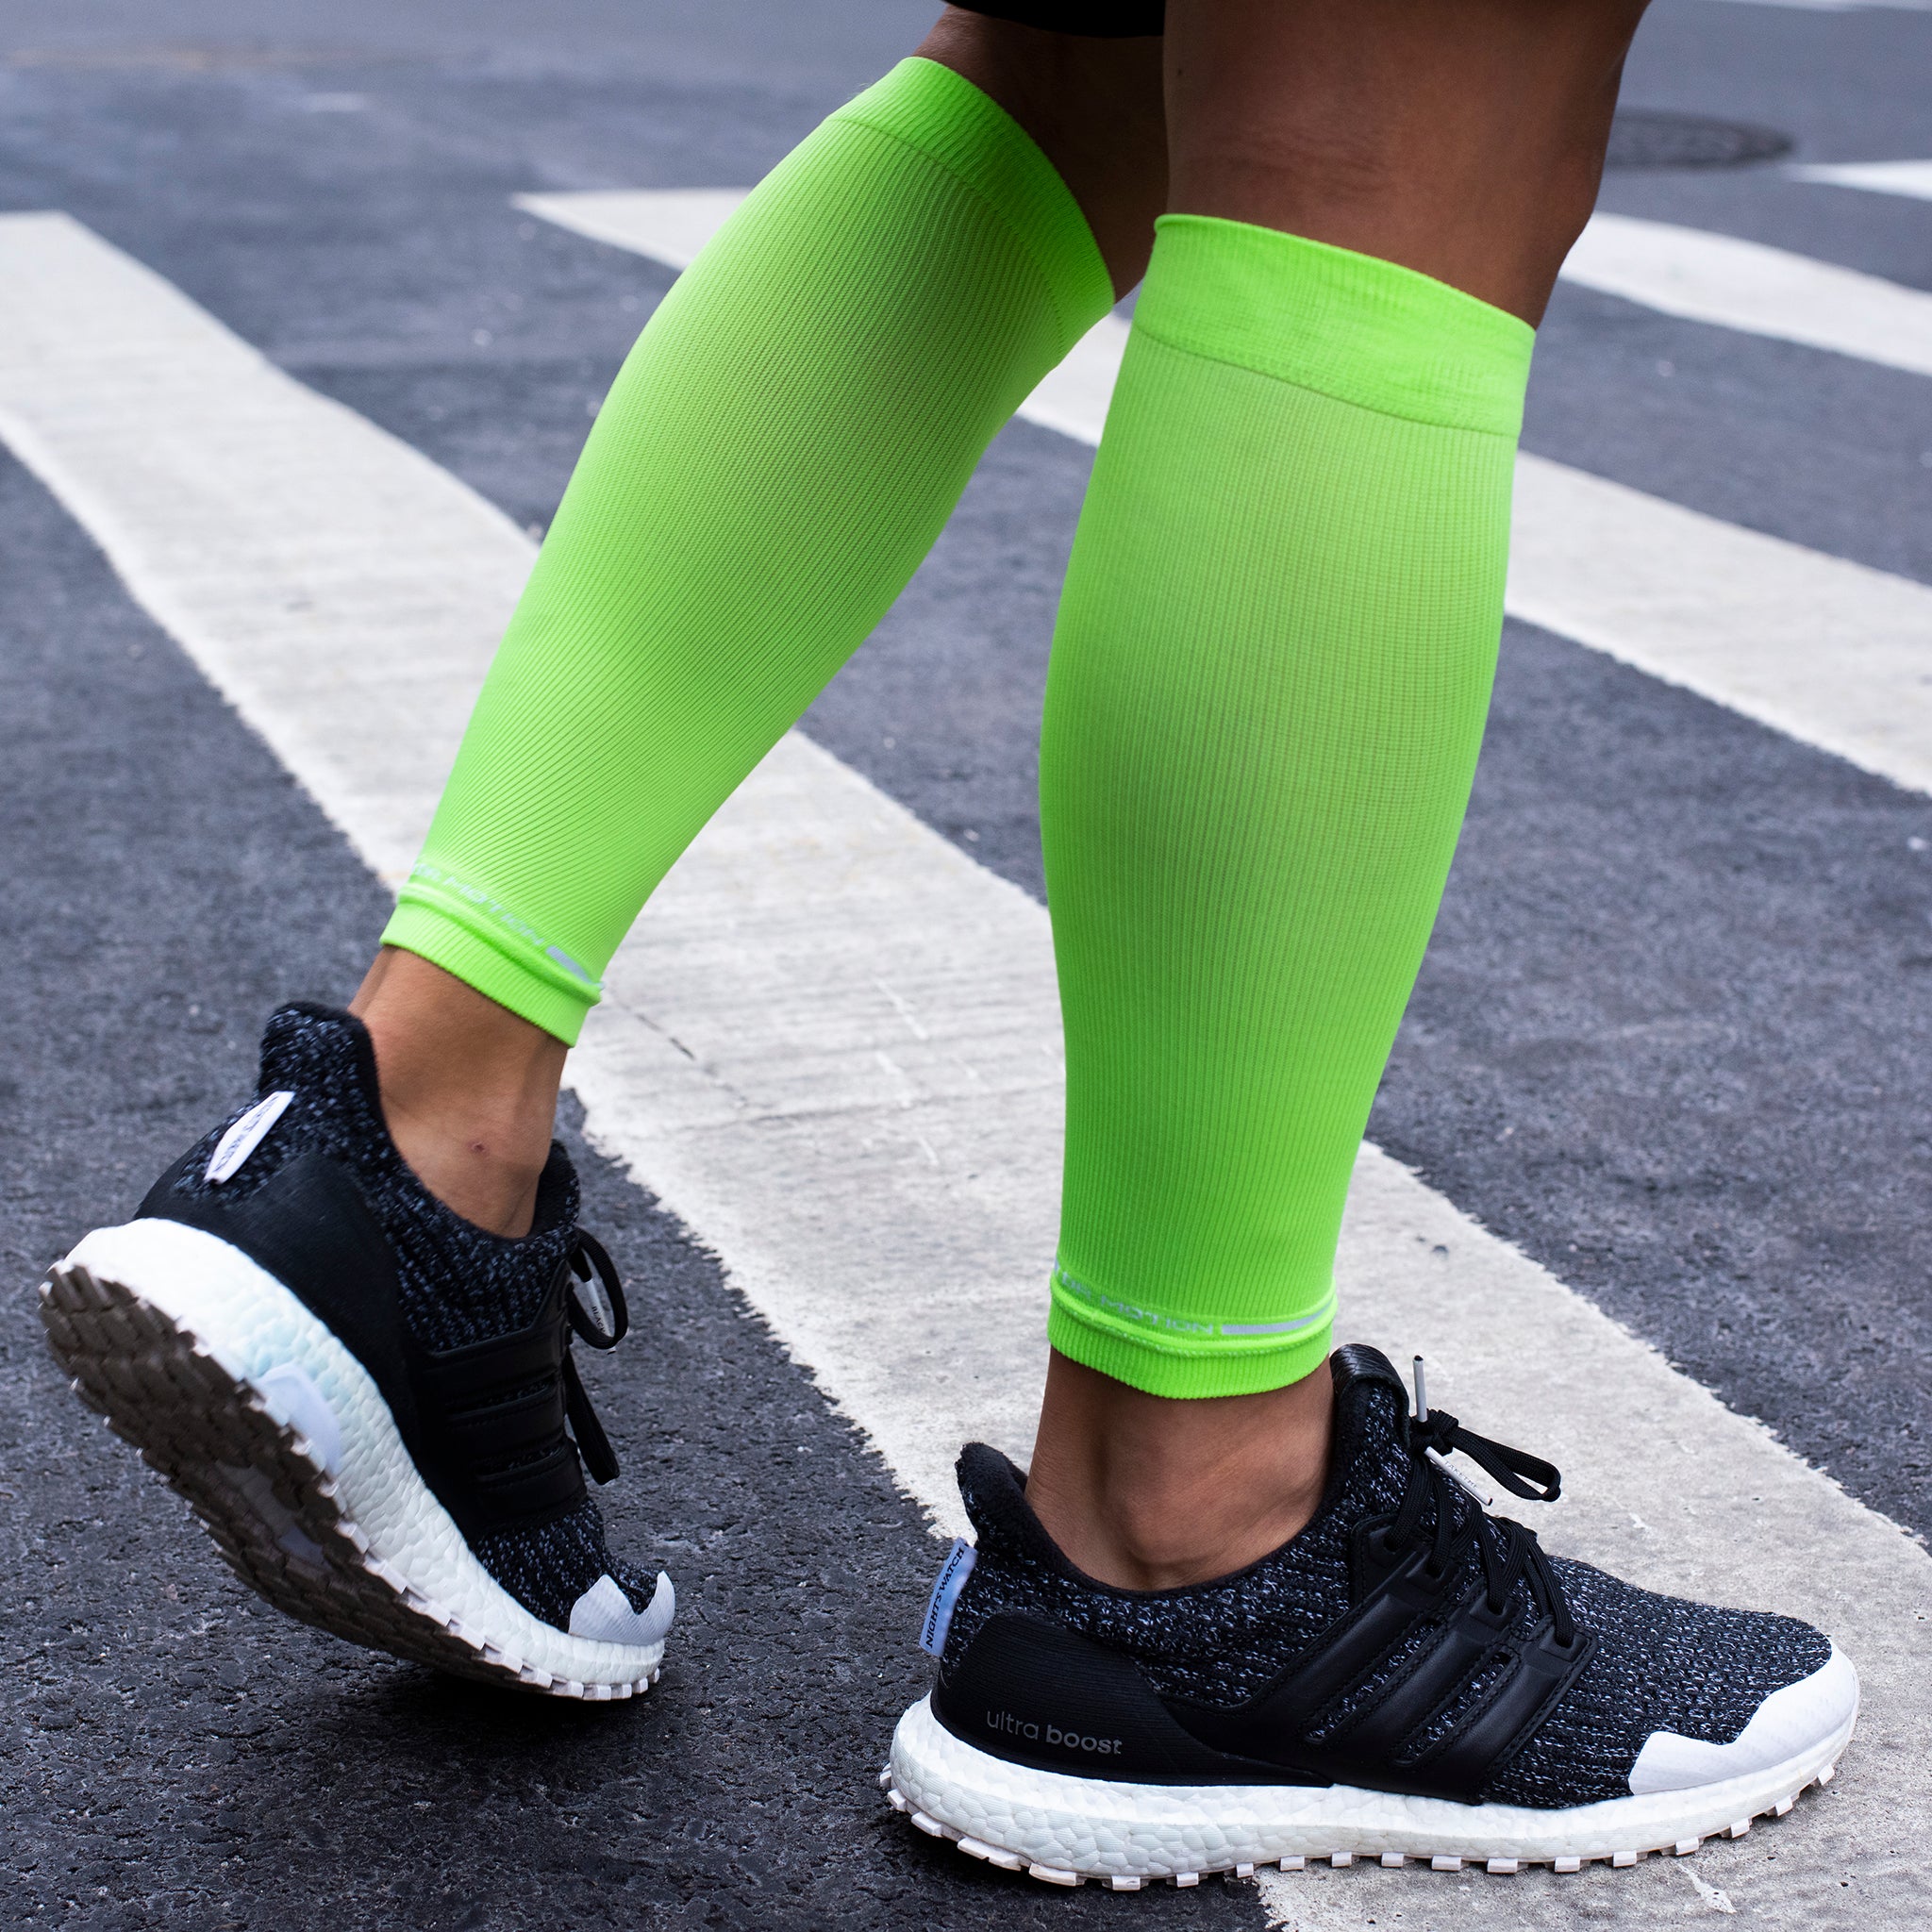 Should You Wear Compression Sleeves While Running?